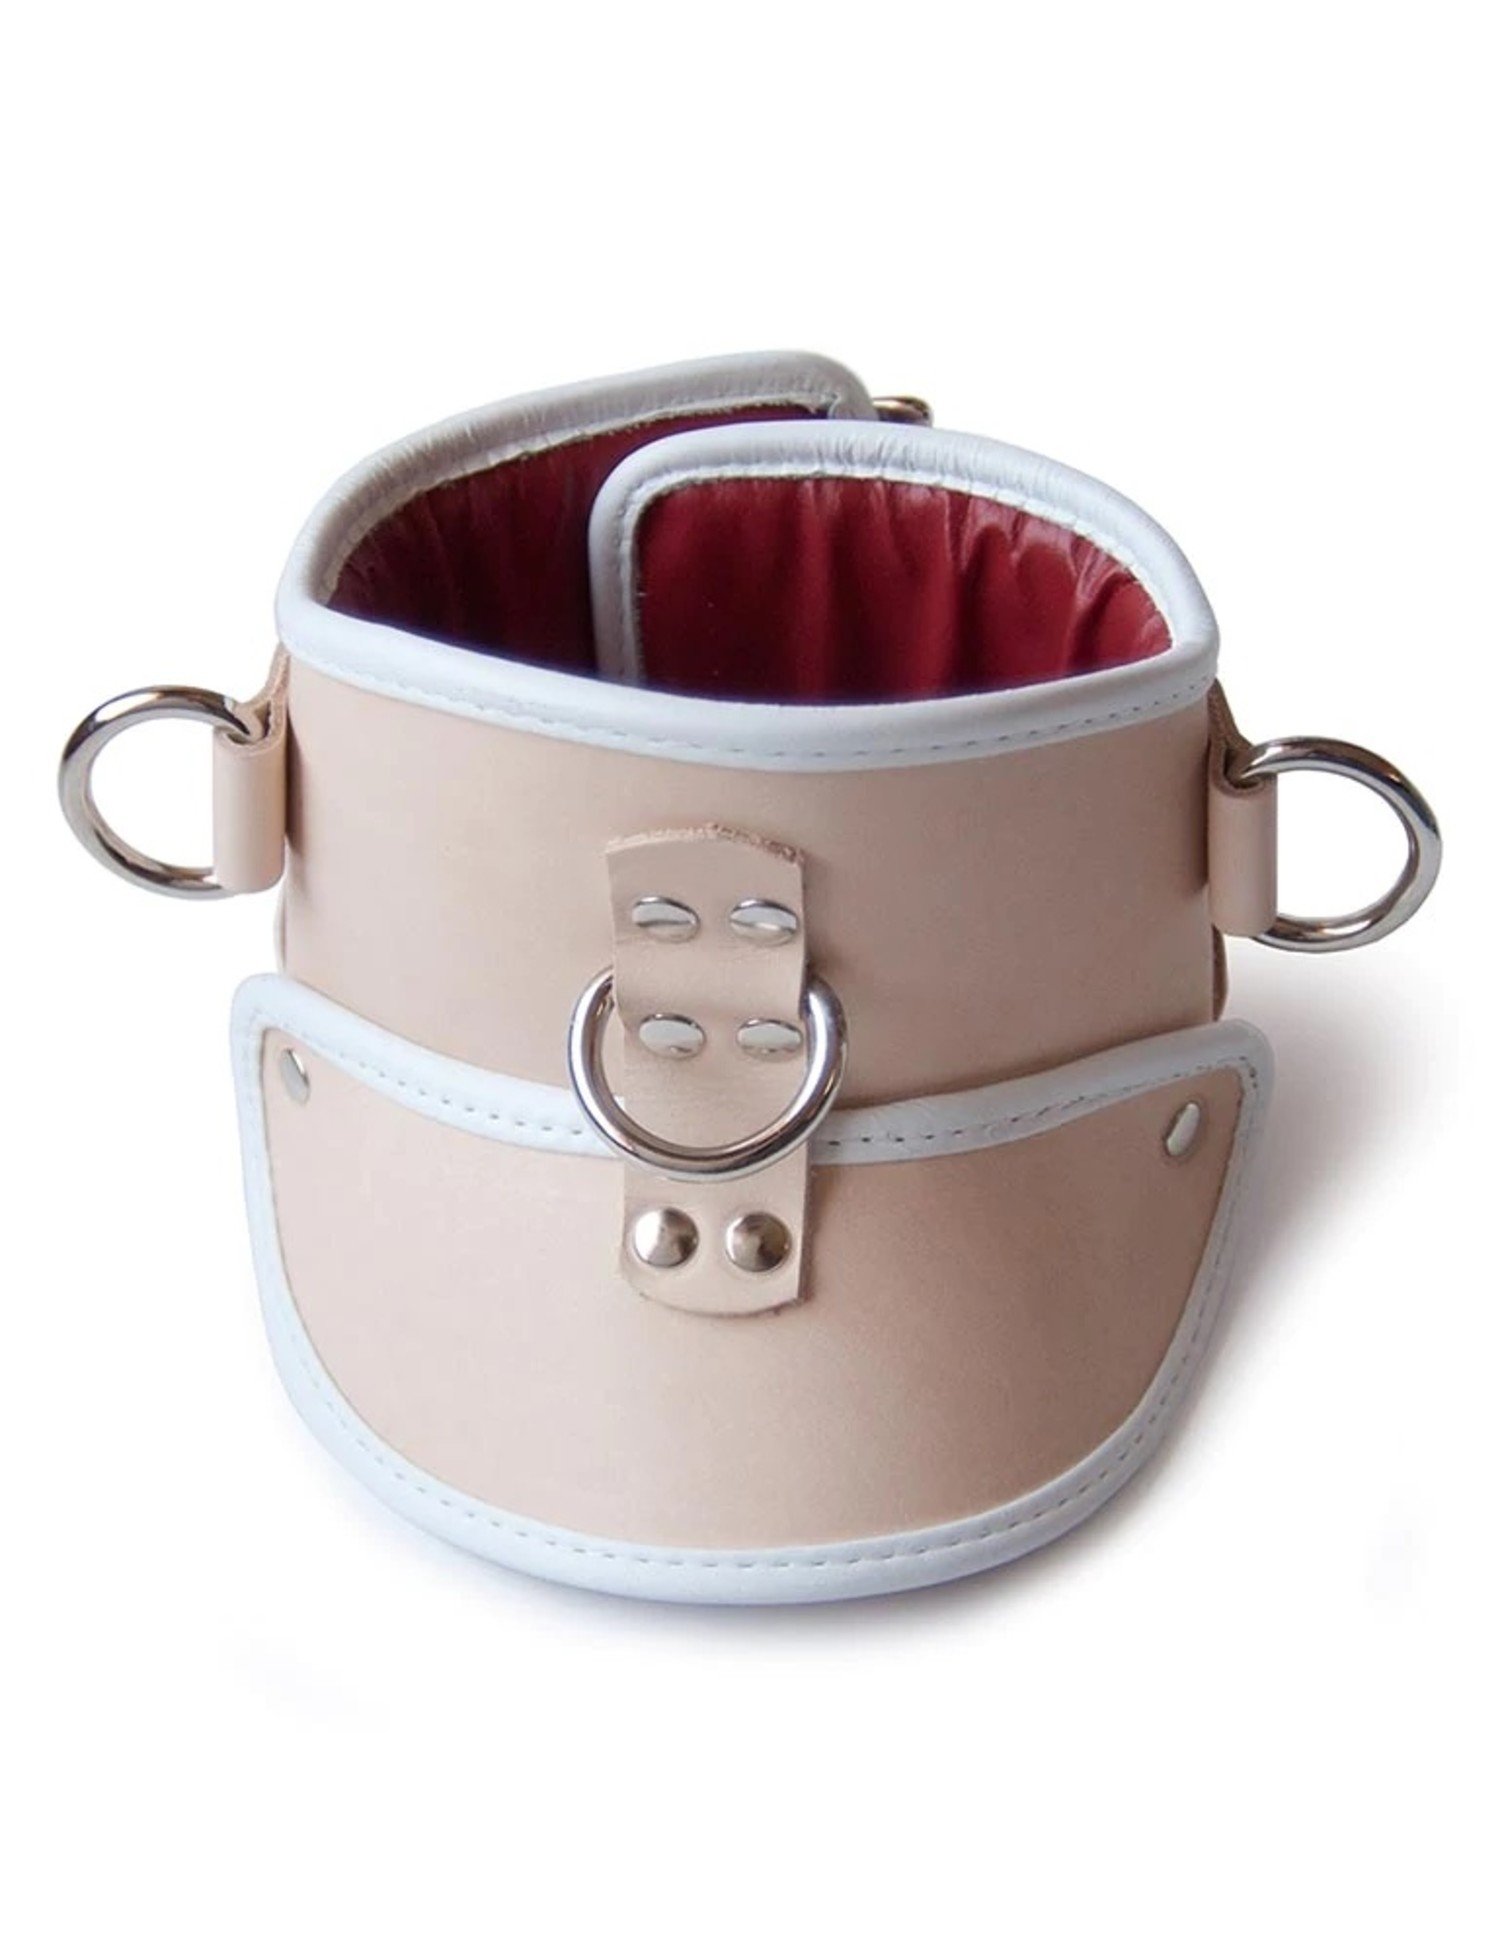 Deluxe Padded Leather Posture Collar w/ D Rings – Stockroom Wholesale